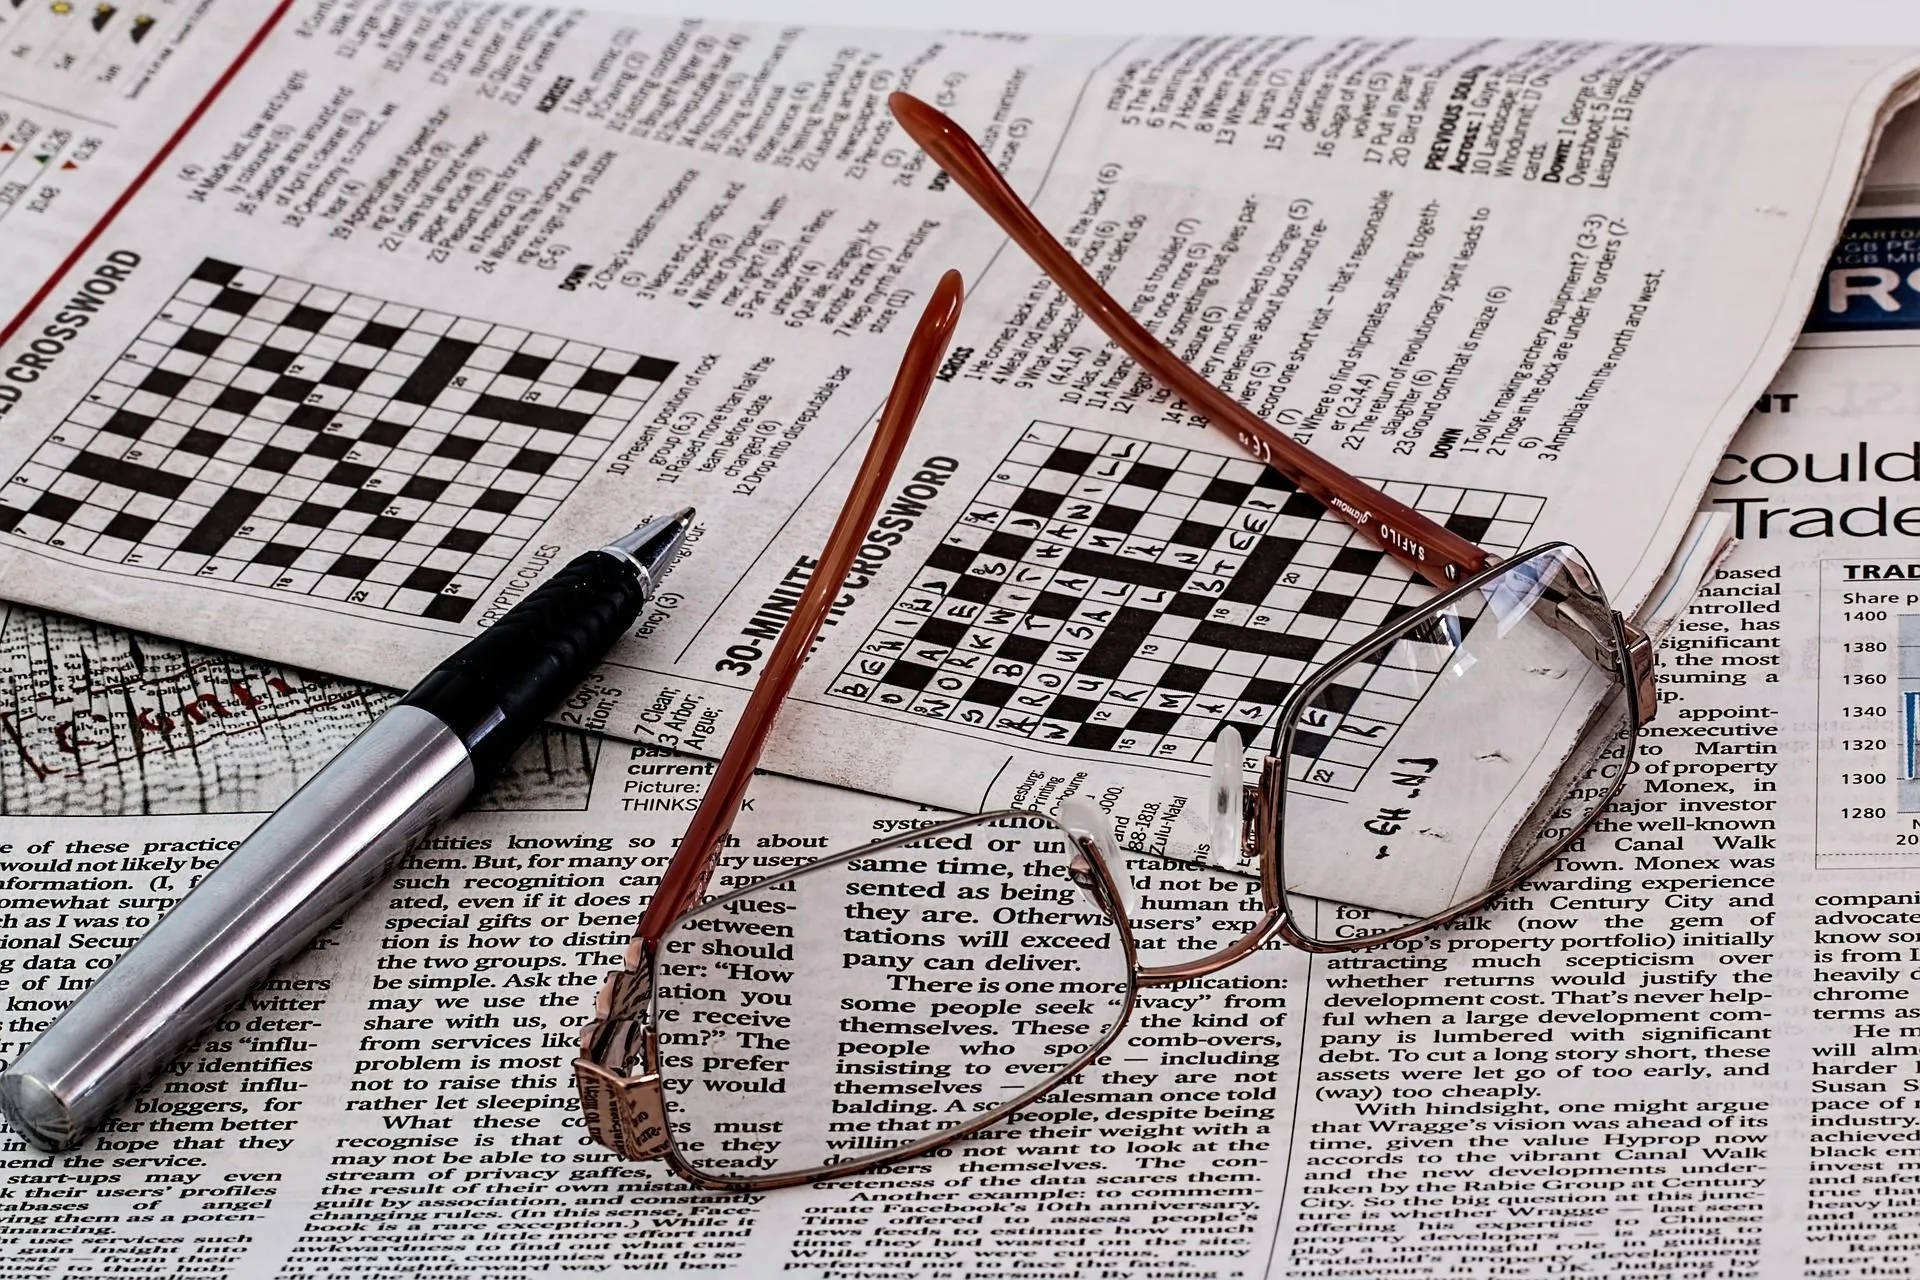 Solving a crossword puzzle game with friends is a great way to celebrate this special occasion.